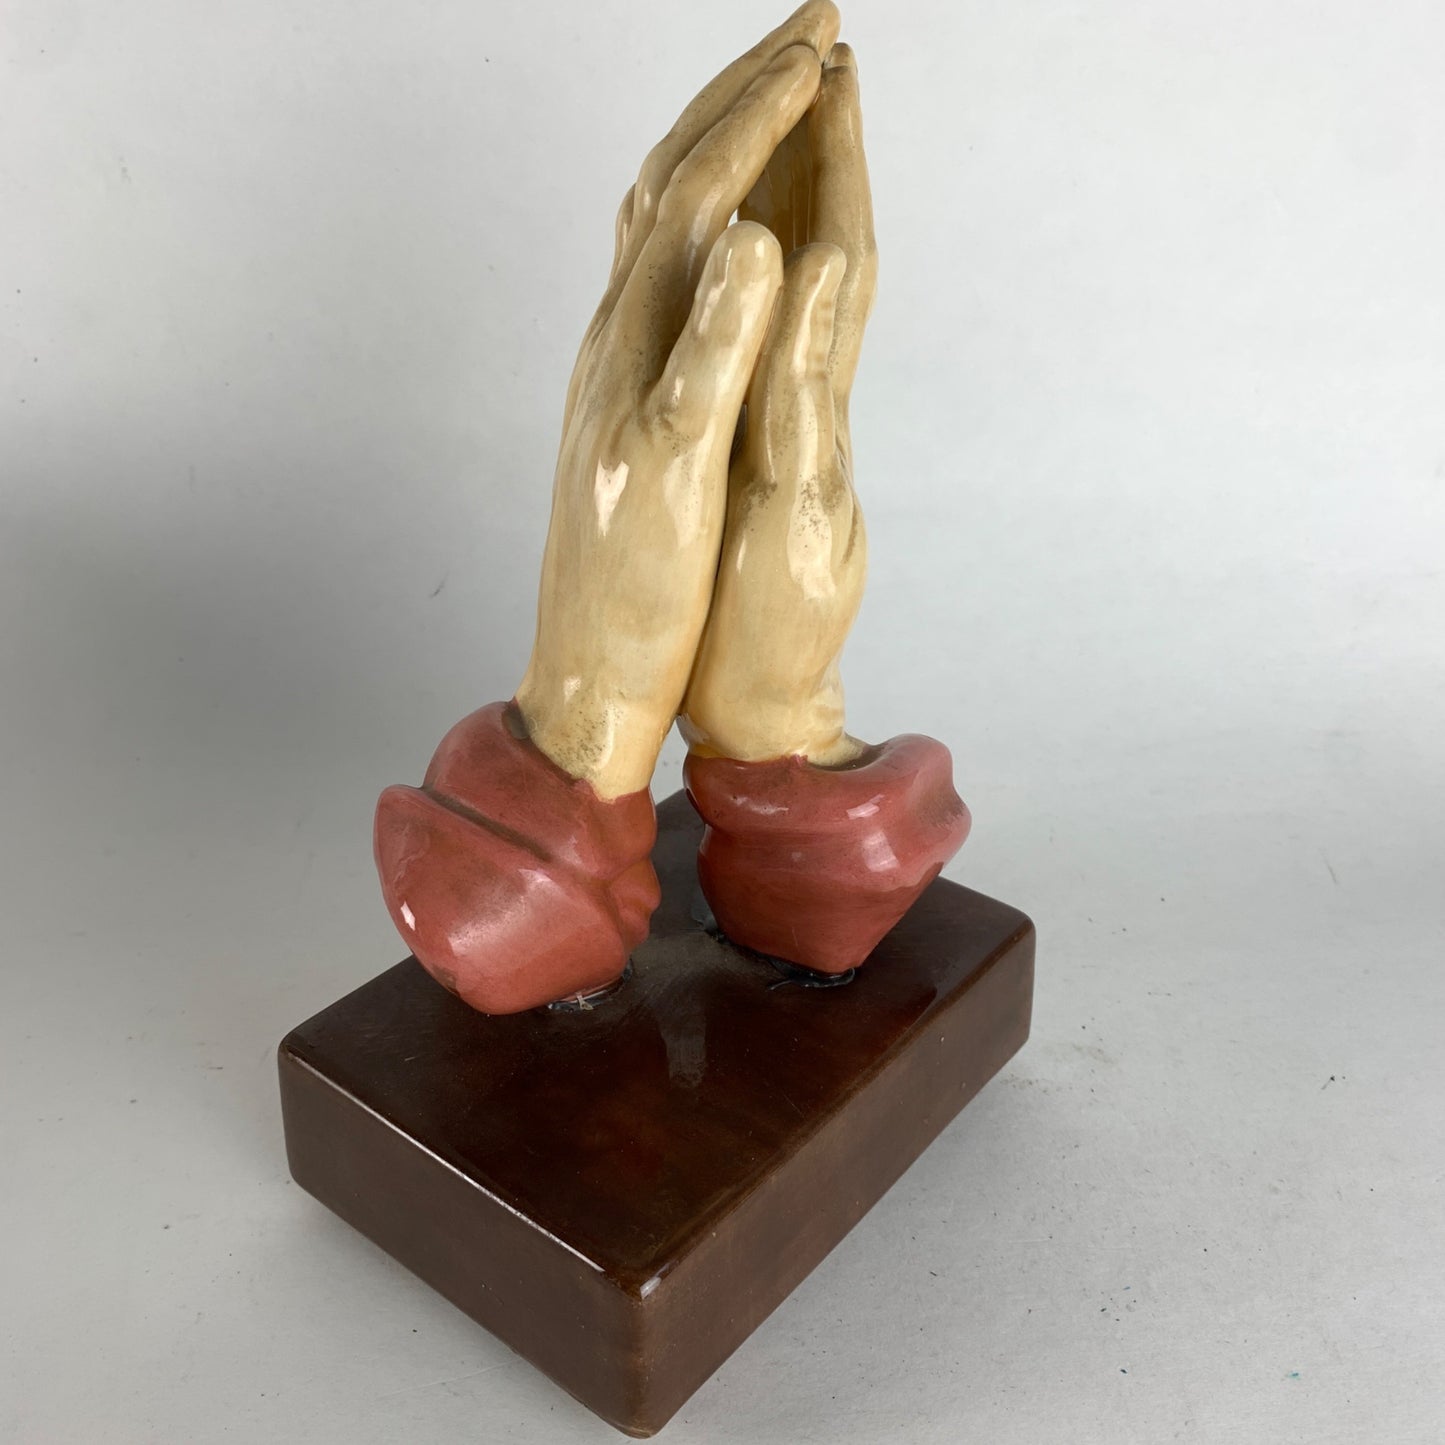 Atlantic Mold Co. Praying Hands Sculpture Painted